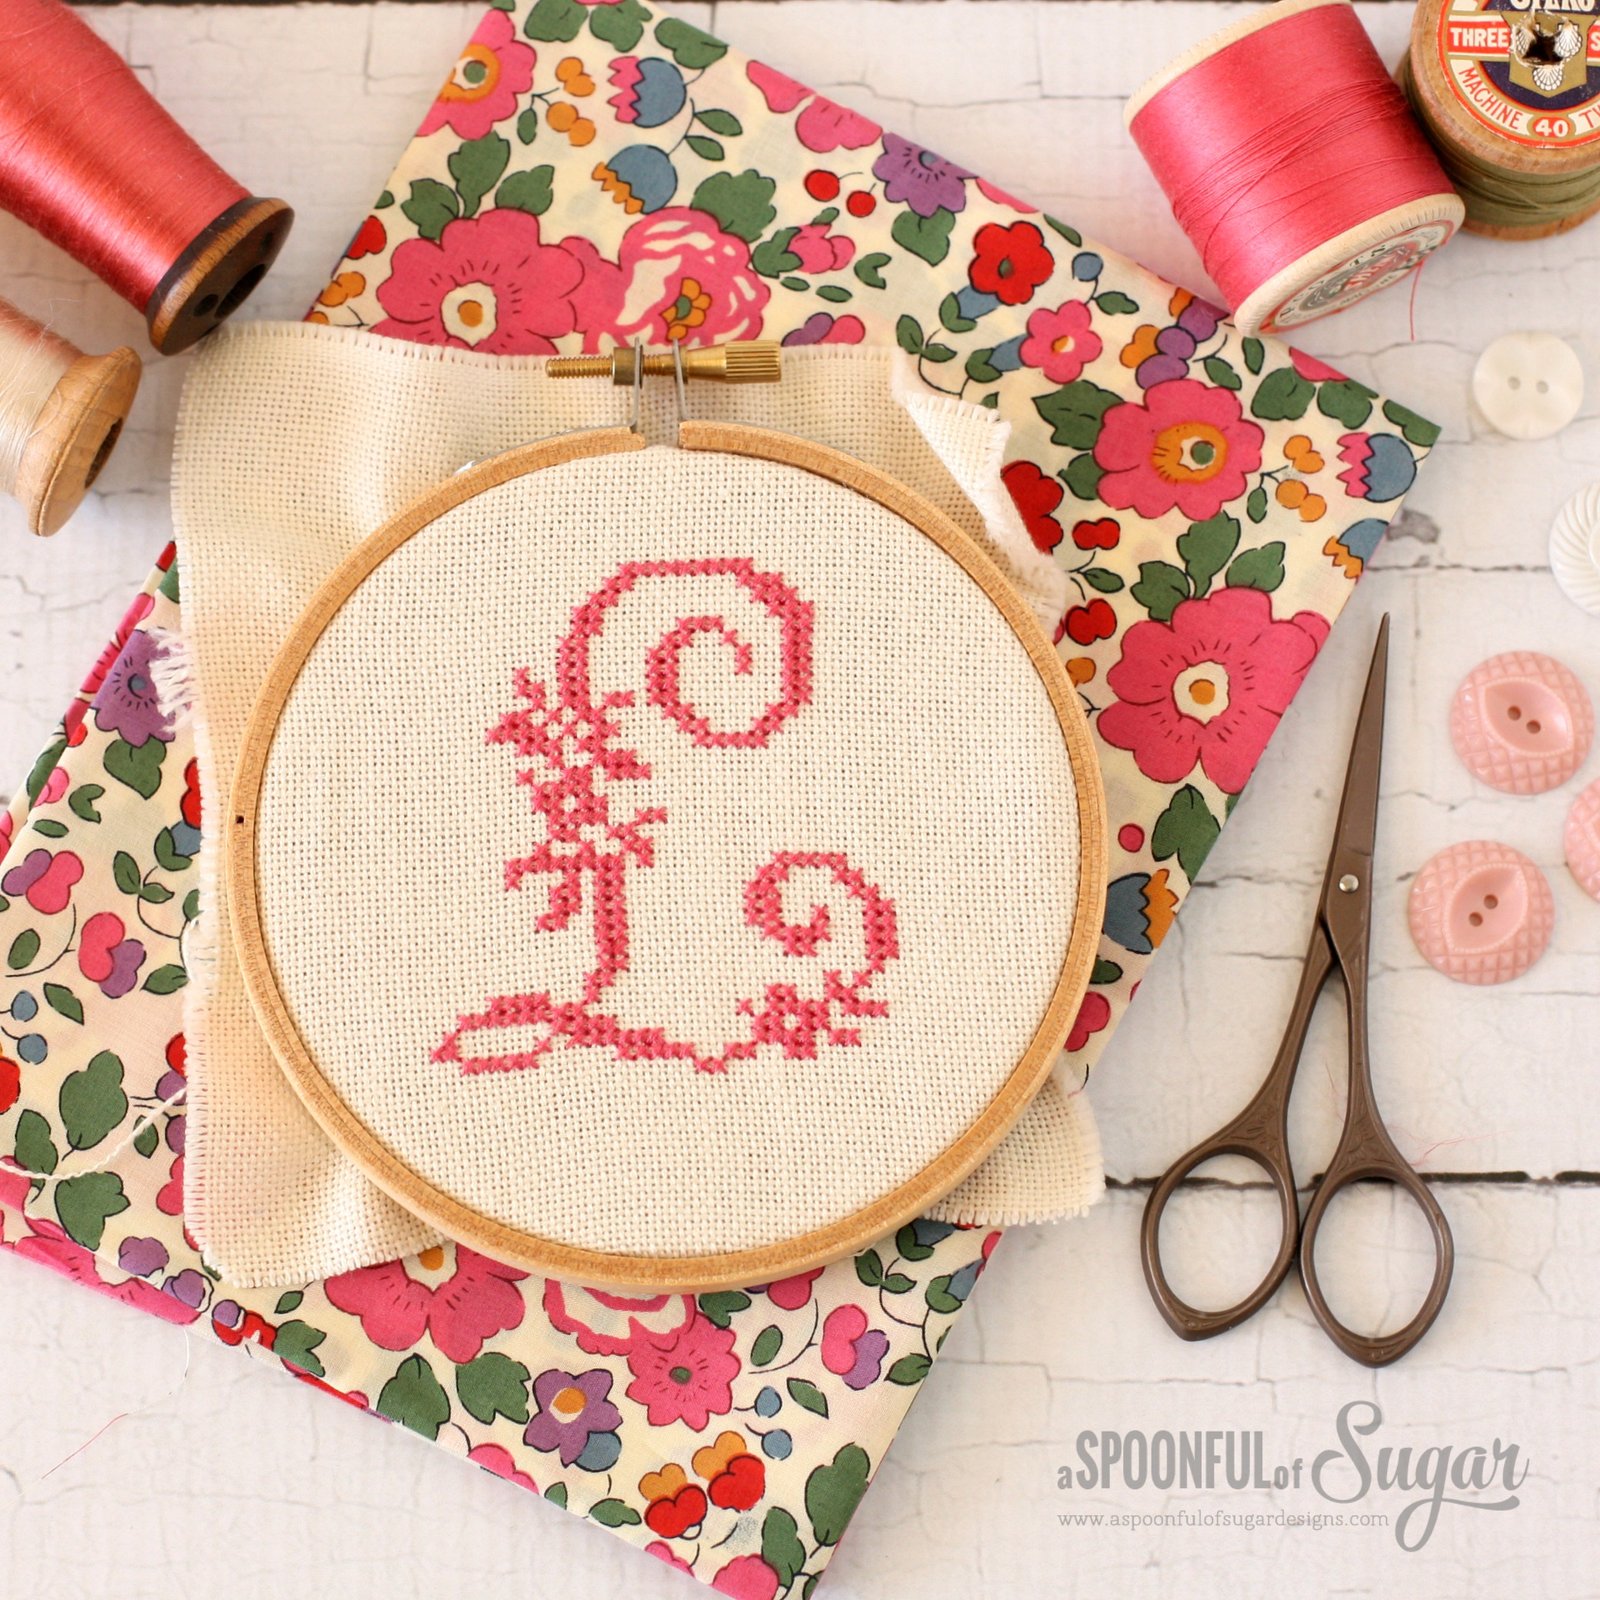 Monogrammed Sachets - project from Maison Sajou Sewing Book.